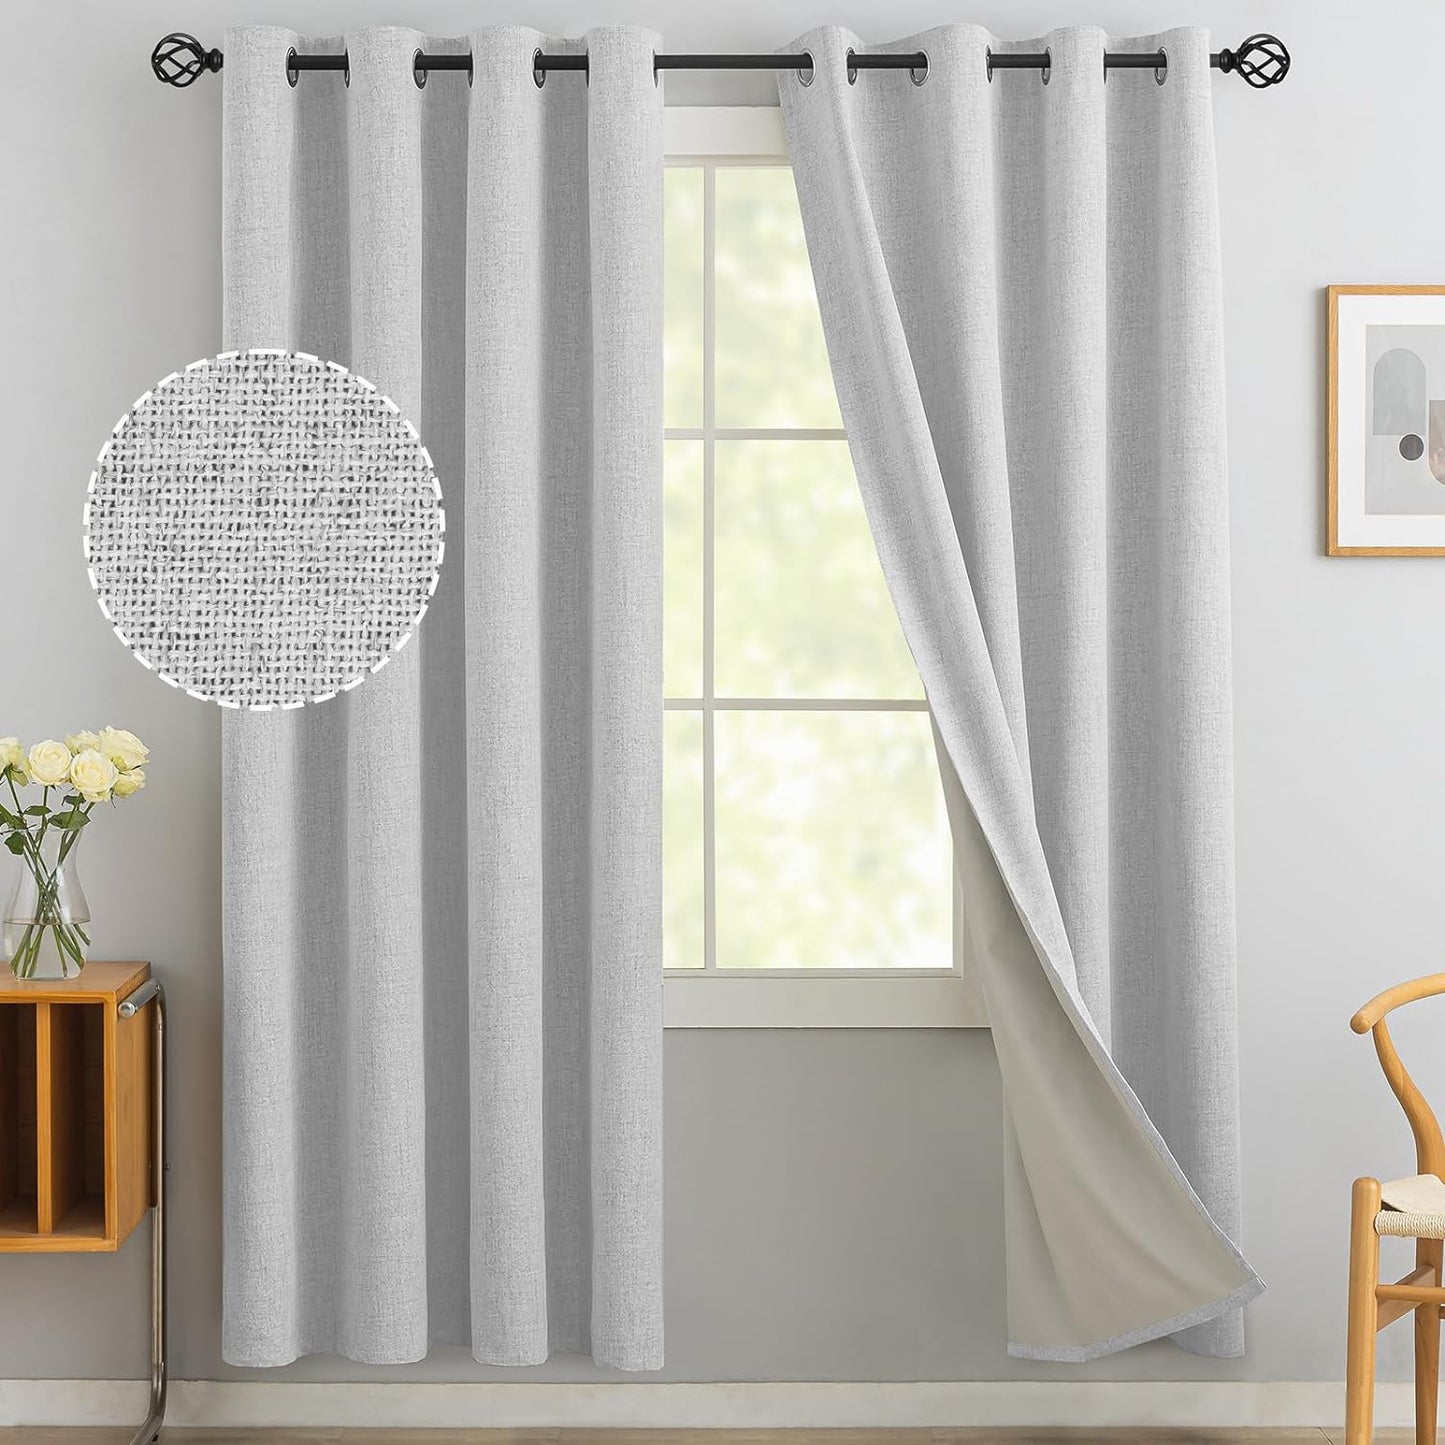 Yakamok Natural Linen Curtains 100% Blackout 84 Inches Long,Room Darkening Textured Curtains for Living Room Thermal Grommet Bedroom Curtains 2 Panels with Greyish White Liner  Yakamok White 52W X 72L / 2 Panels 